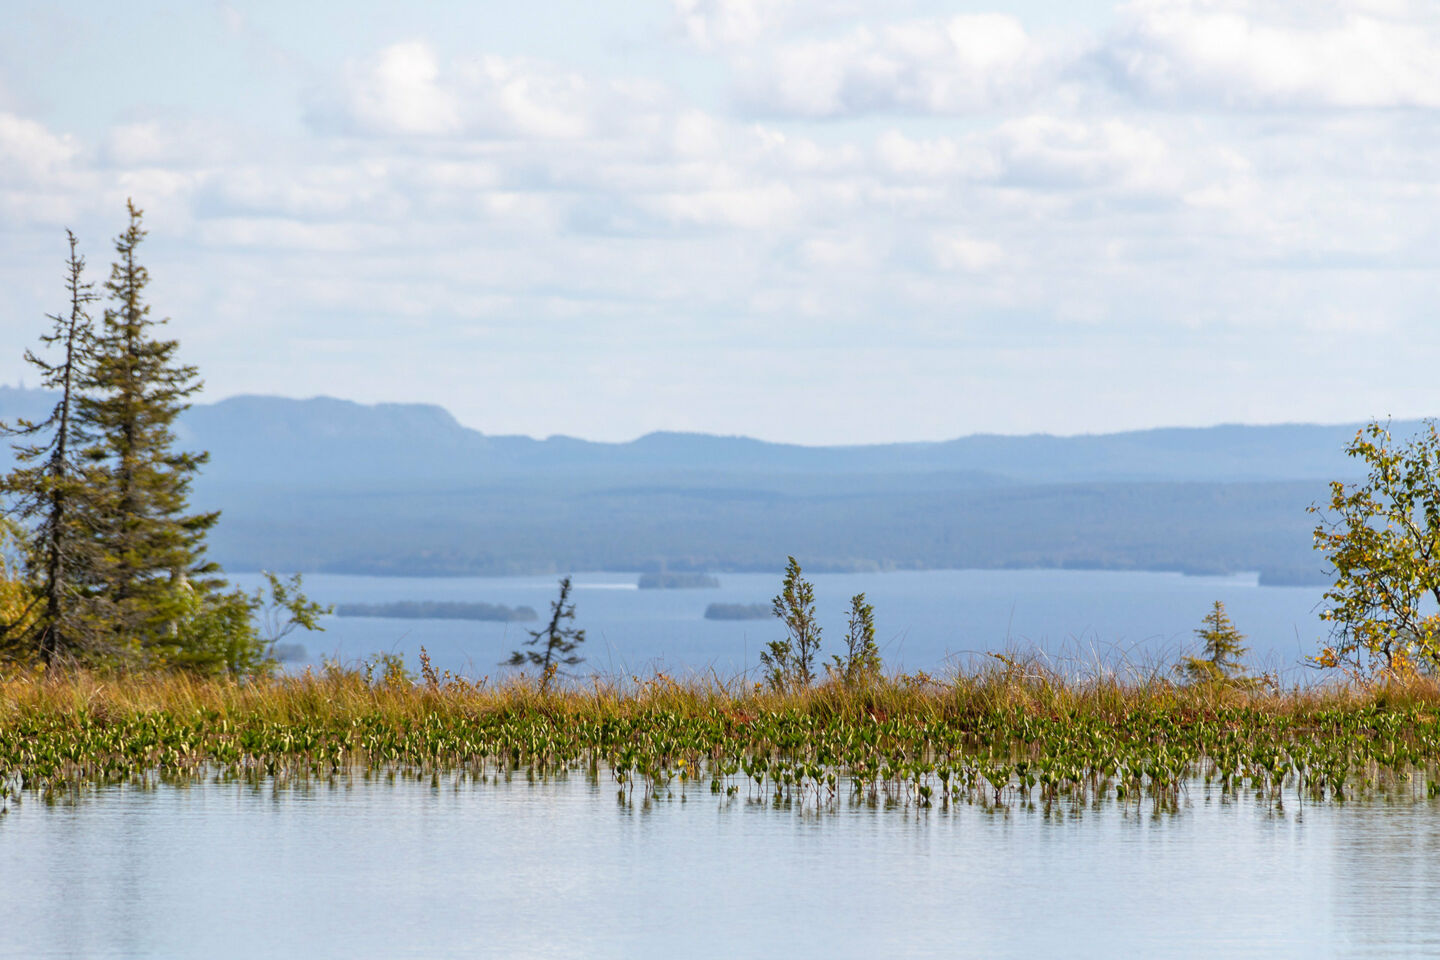 Summer at Riisitunturi National Park in Posio, a Finnish Lapland filming location